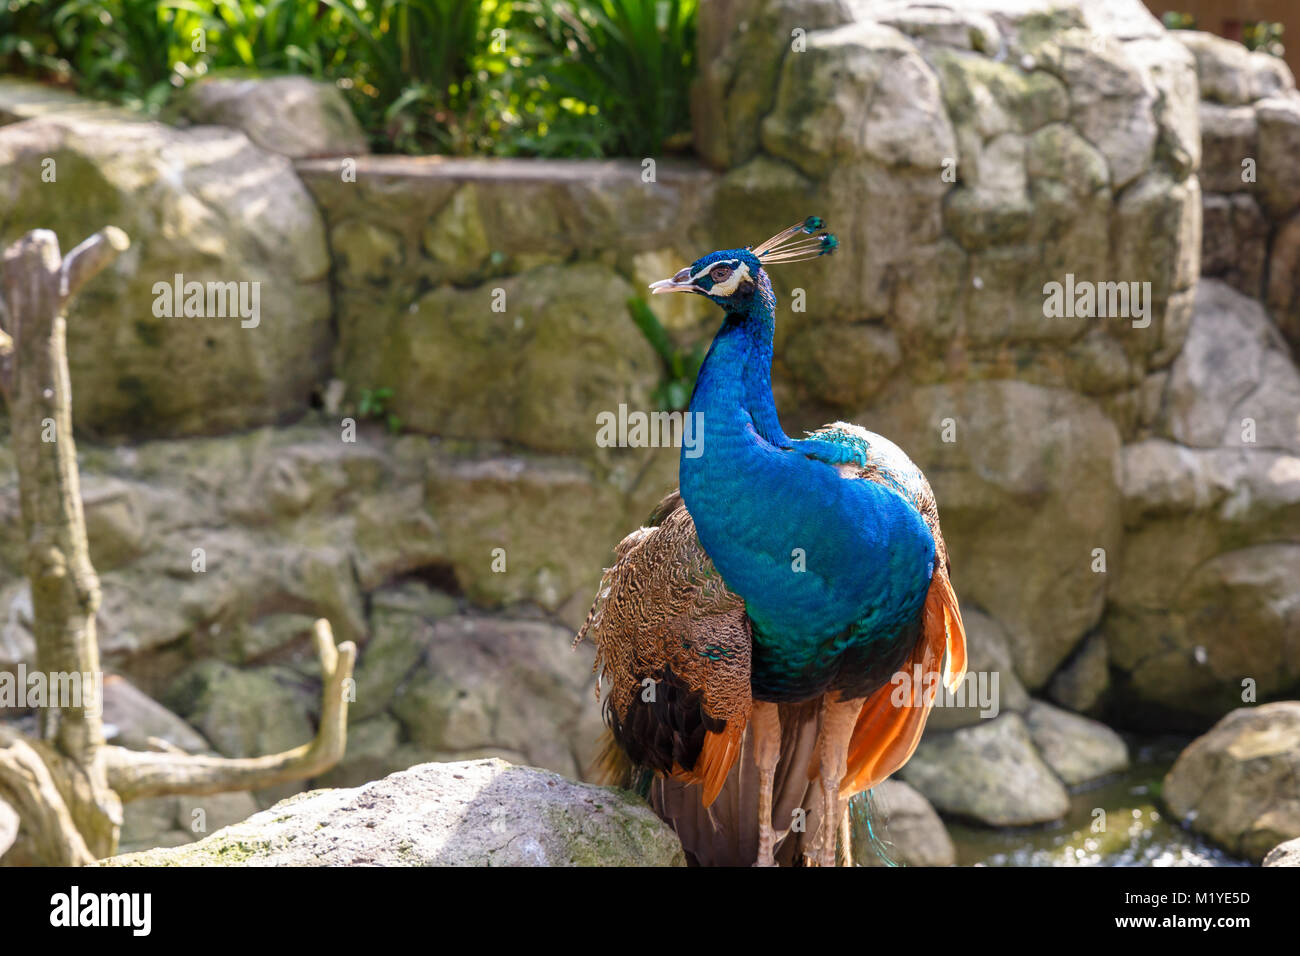 Download this stock image: Indian blue peacock on the background of stones ...